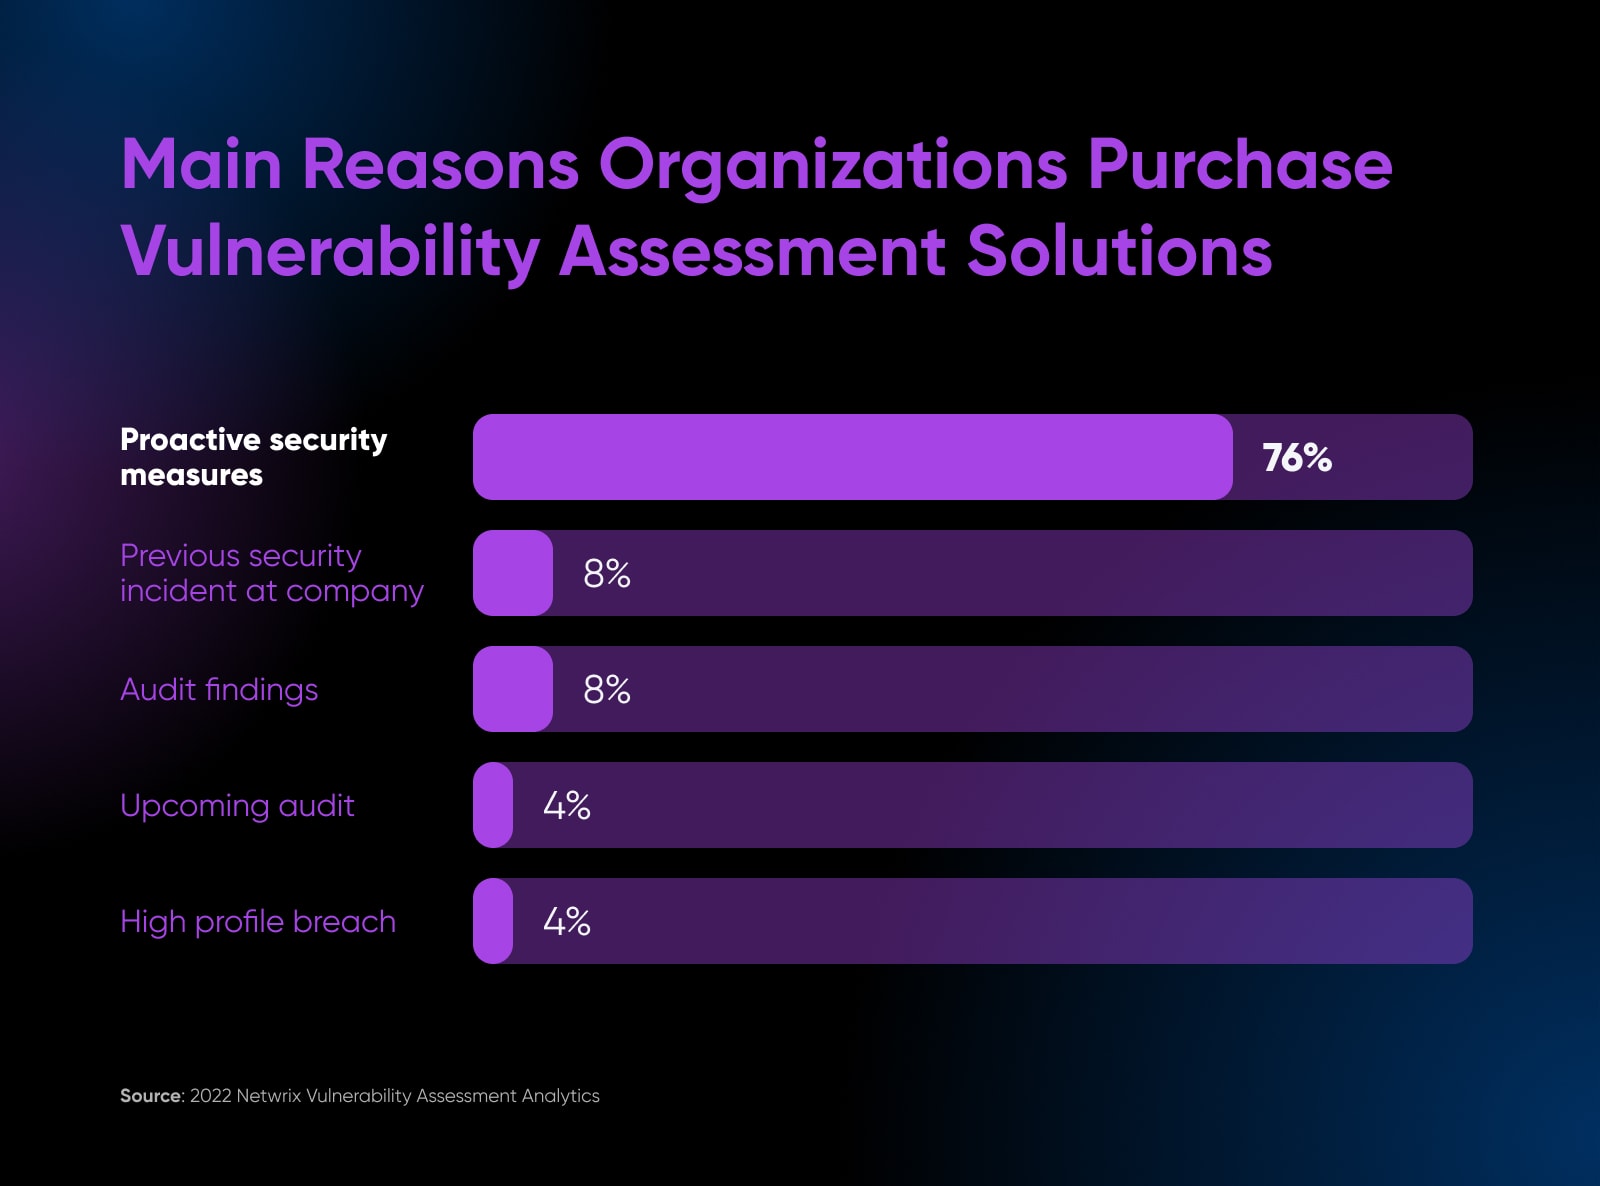 main reasons organizations purchase vulnerability assessment solutions bar graph, top answer by far is "proactive security measures" 